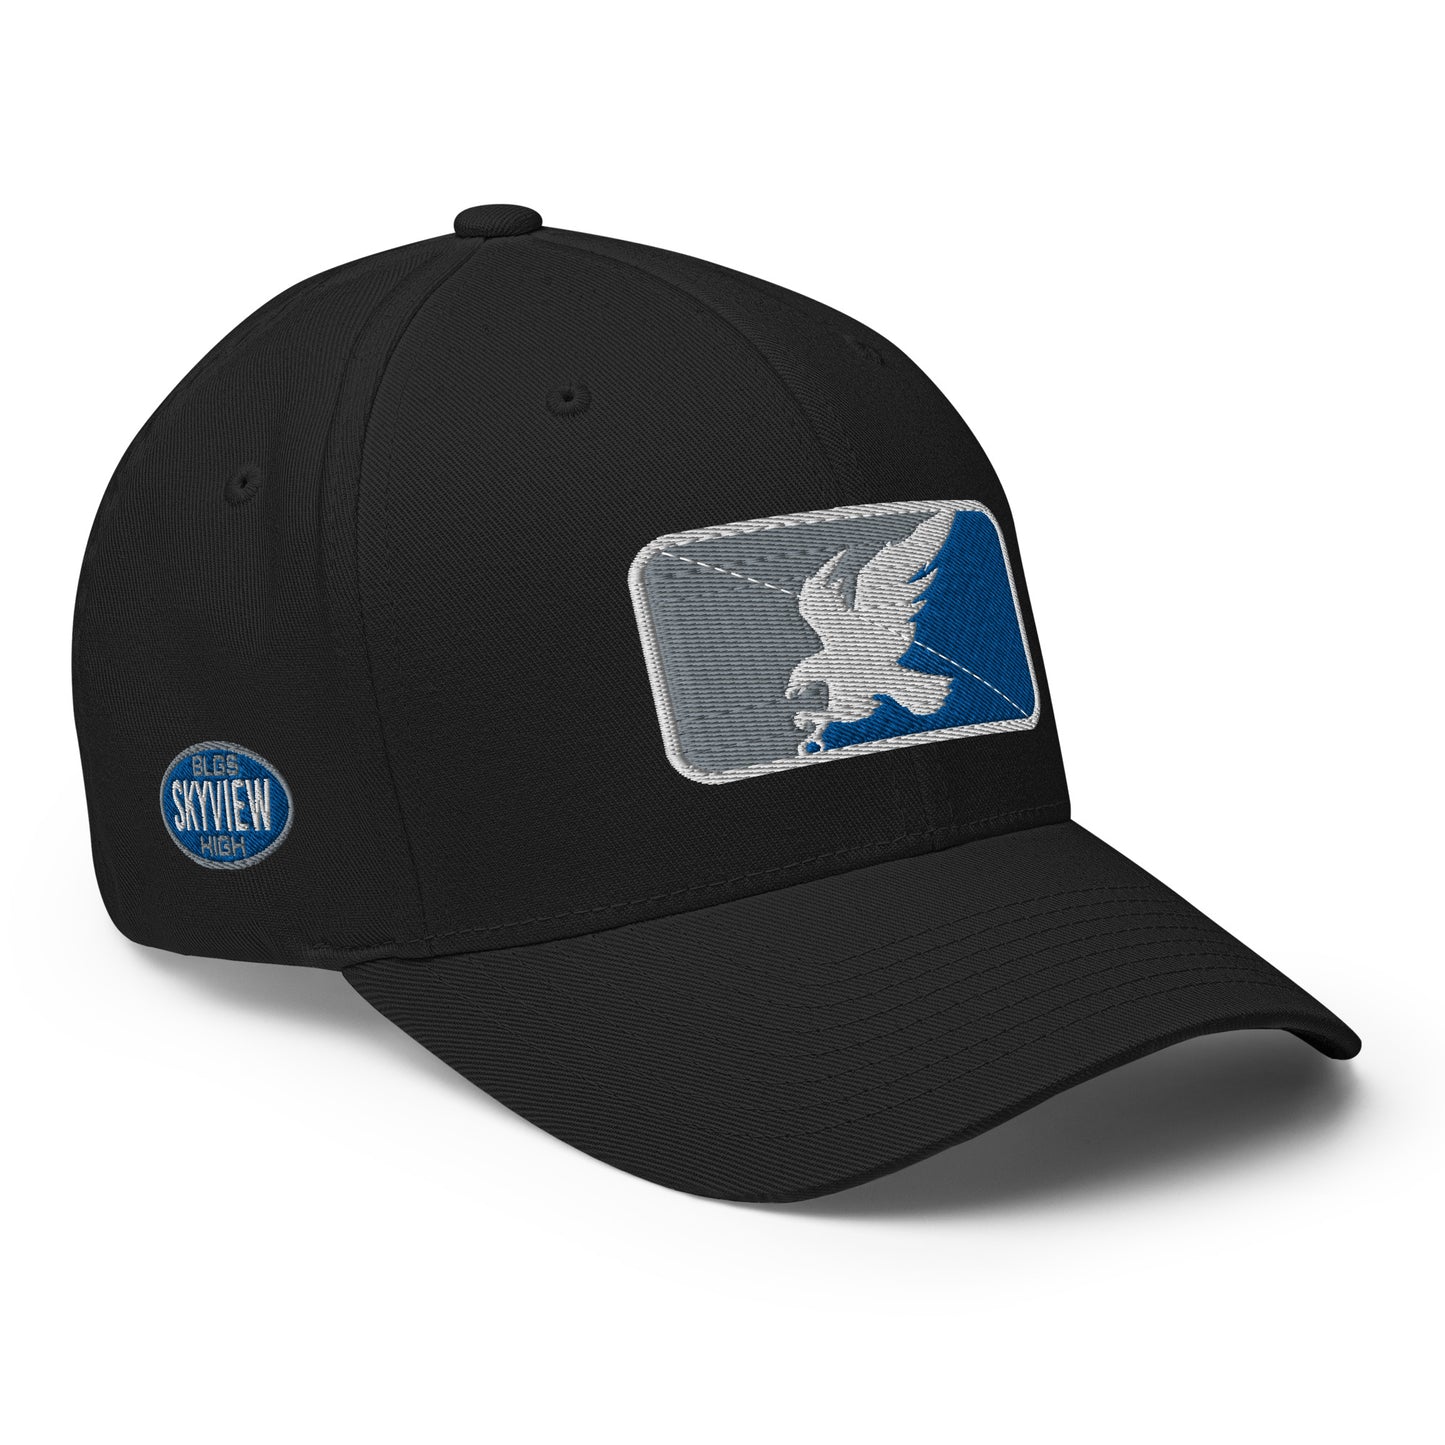 SHS Structured Twill Cap - Skyview Falcons